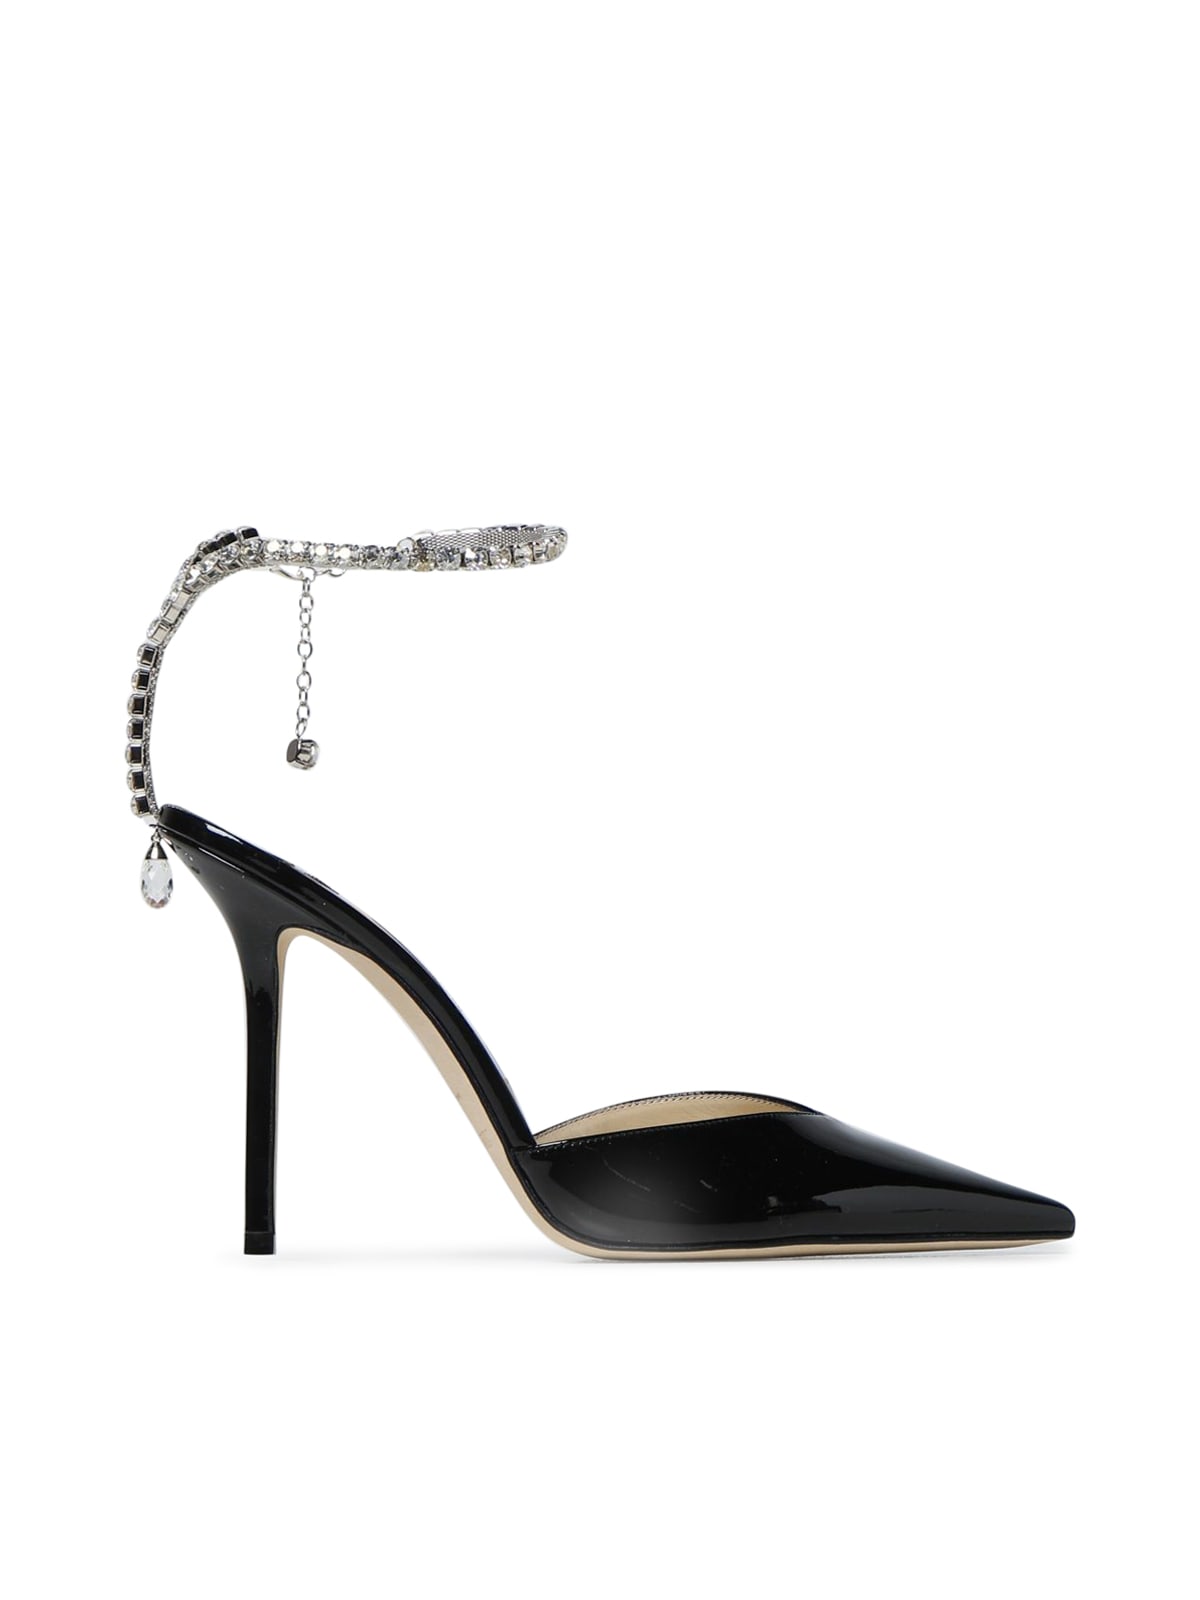 Jimmy Choo Patent Leather W/crystal Chain